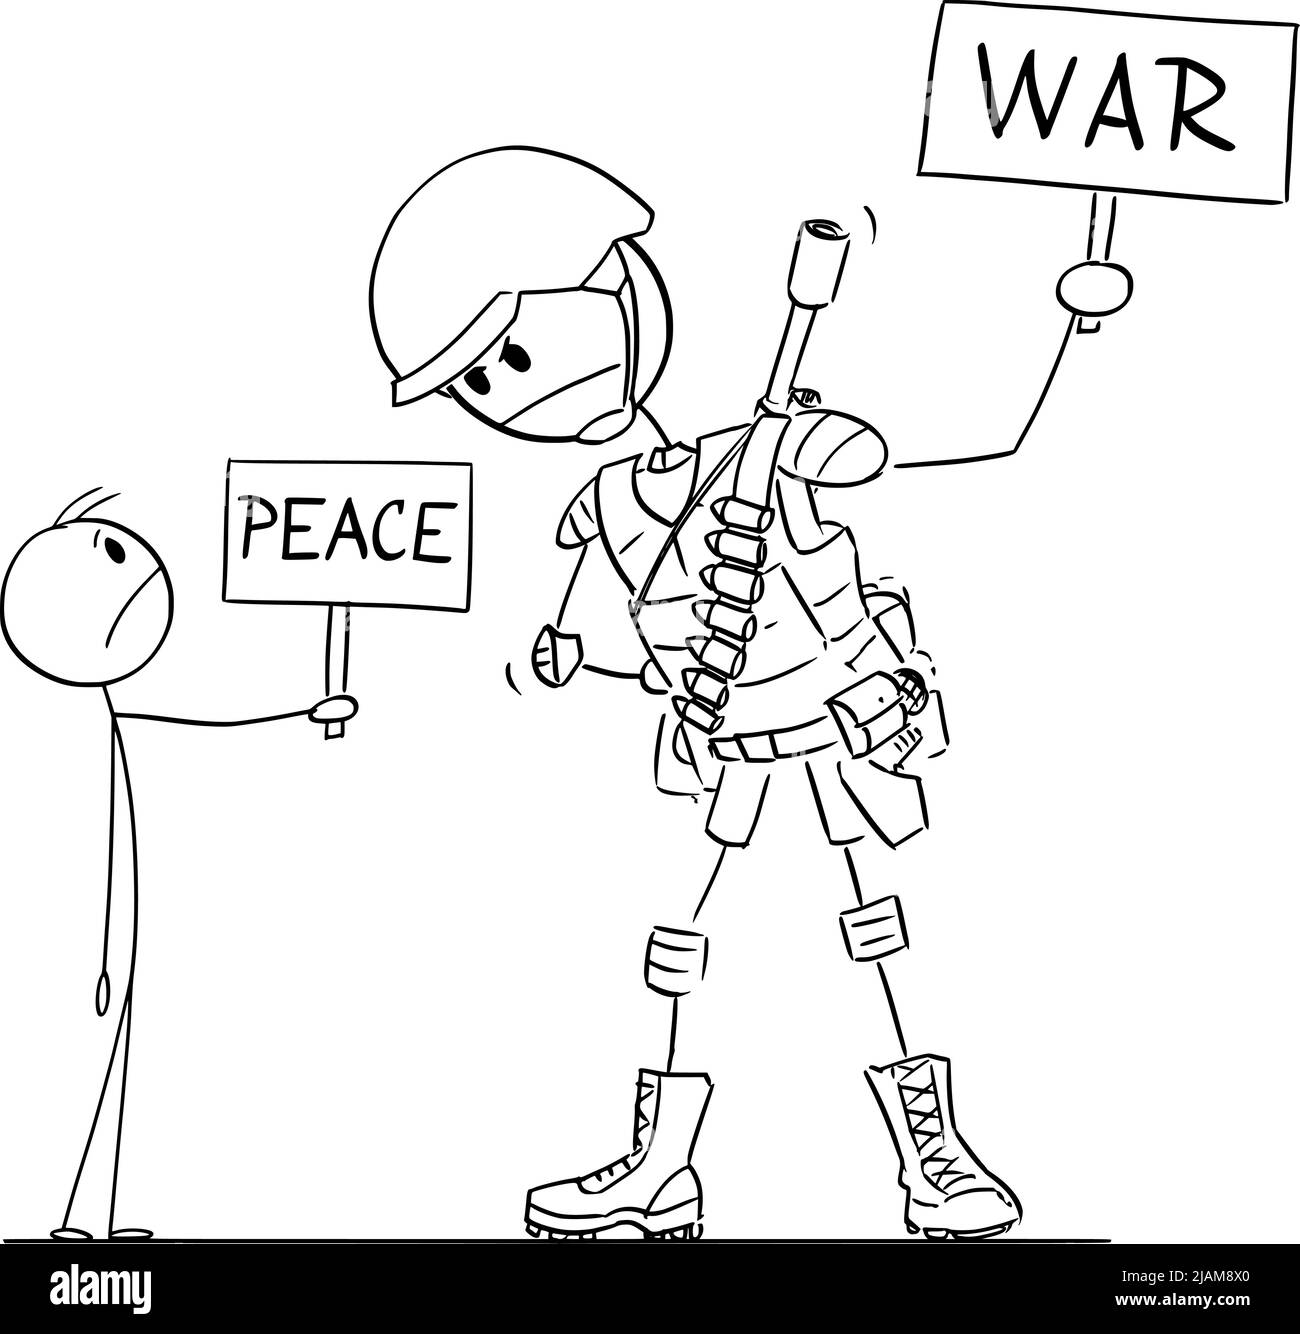 Civilian and Armed Soldier, Peace and War, Vector Cartoon Stick Figure Illustration Stock Vector